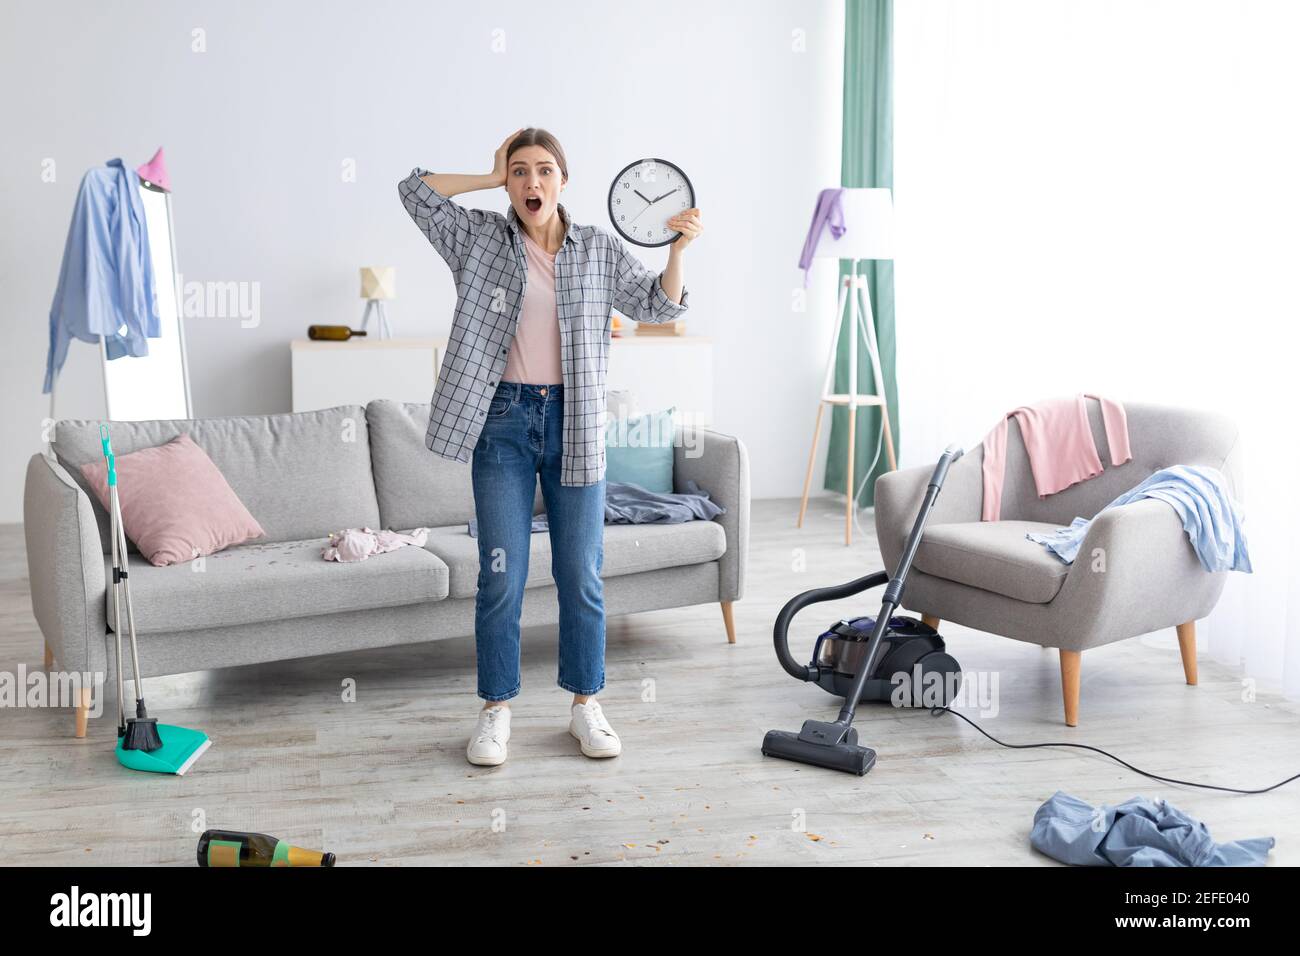 Shocked young lady with clock grabbing her head in terror, standing in messy room after party, too late to clean apartment before return of her parent Stock Photo